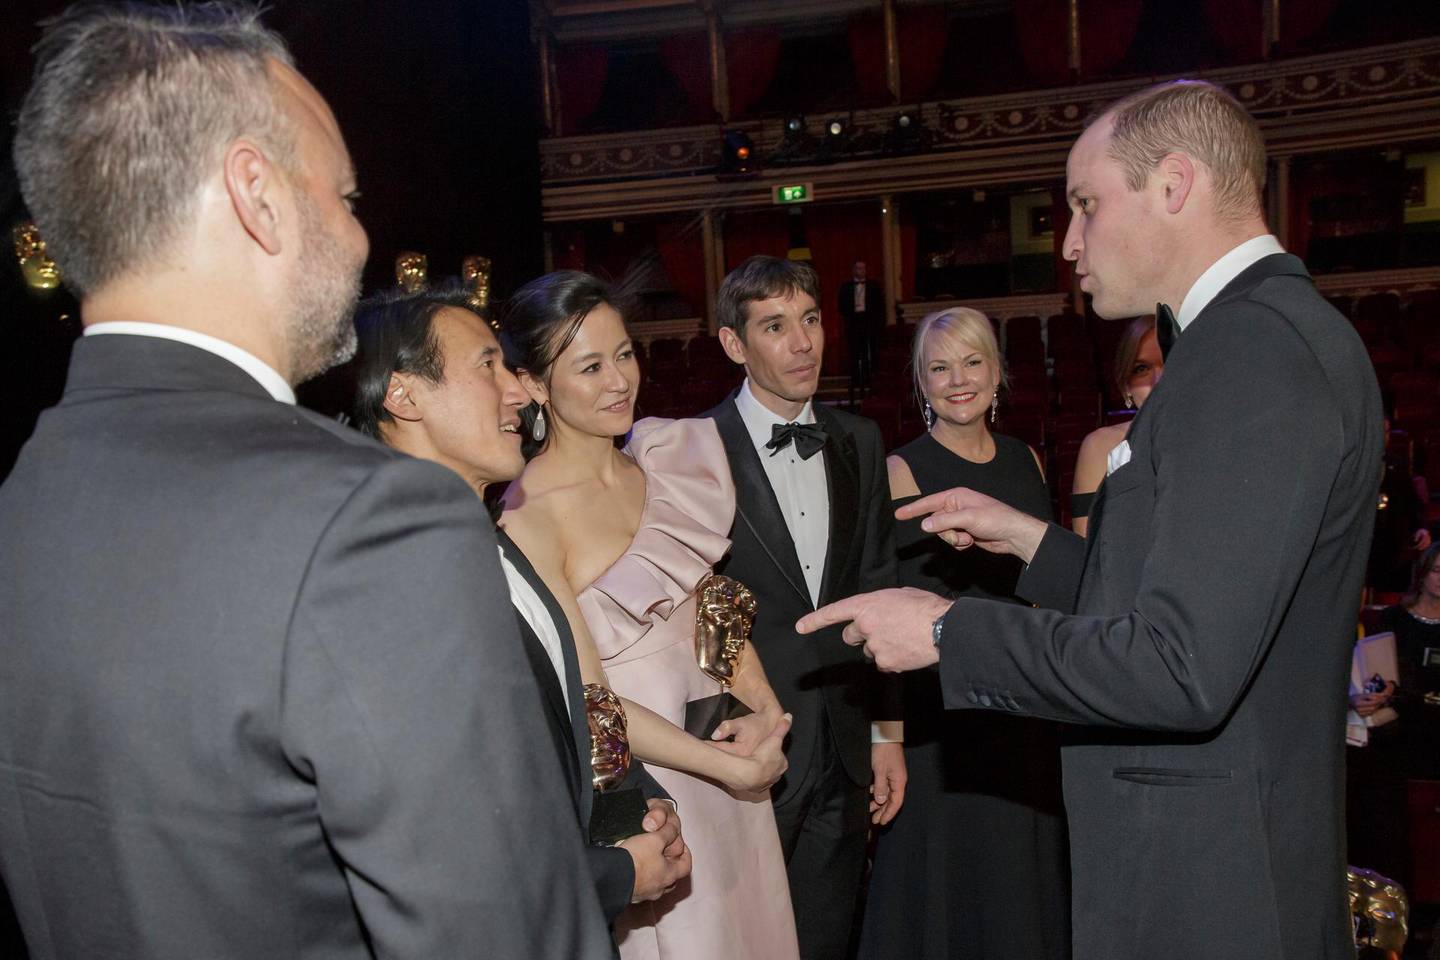 Britain's Prince William meets the team behind the film Free Solo after the BAFTA 2019 Awards at The Royal Albert Hall in London, Sunday Feb. 10, 2019. (AP Photo/Tim Ireland, Pool)